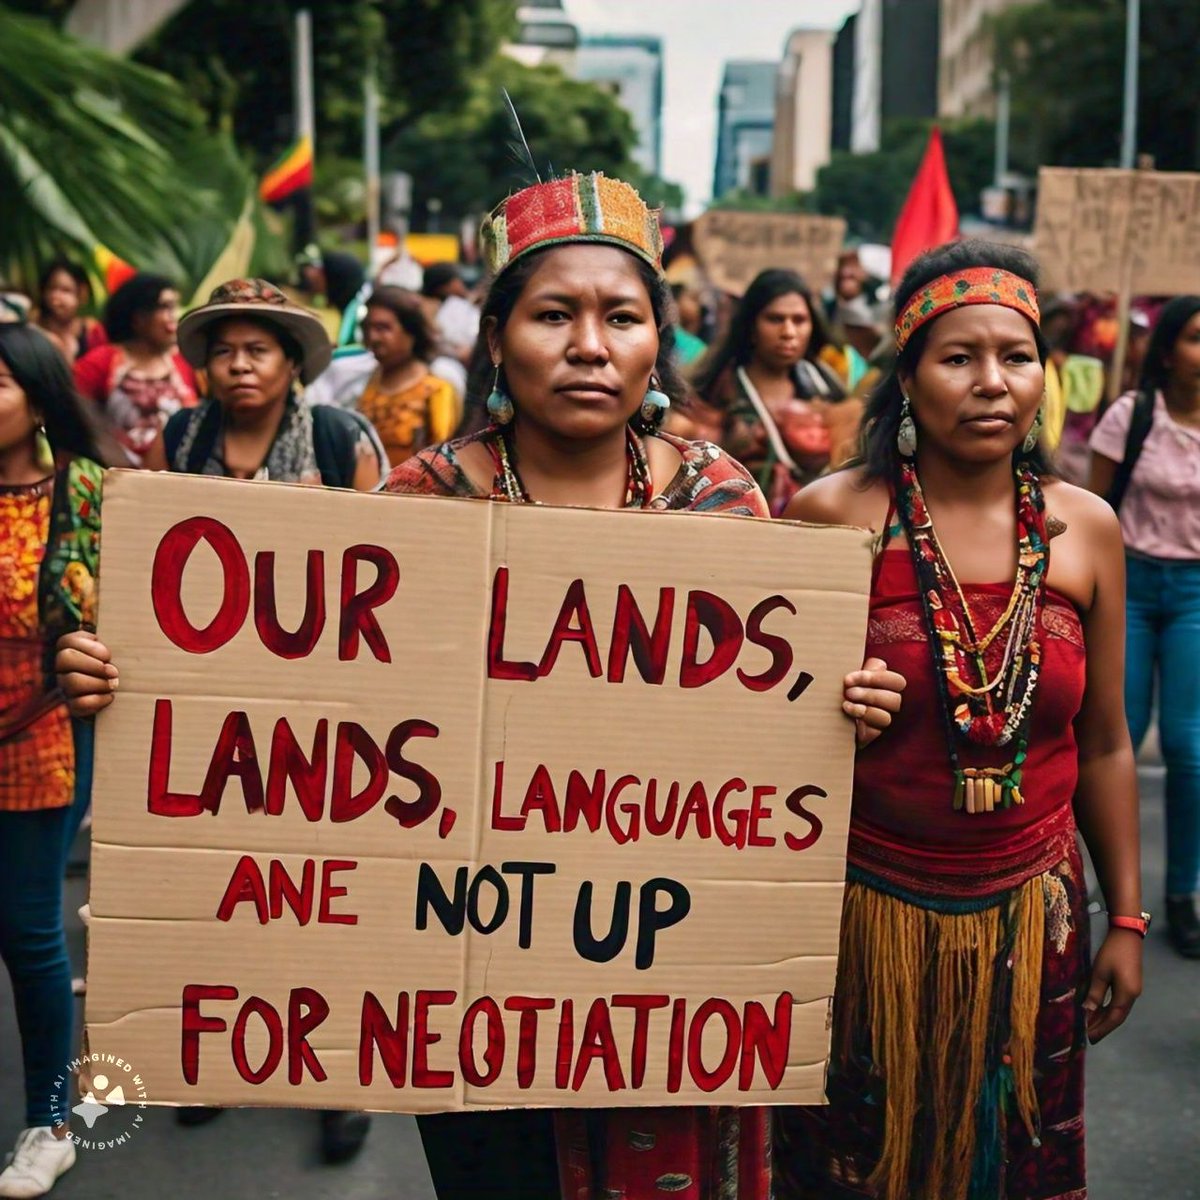 No one should be a refugee in their own home! Indigenous people have a right to their lands, languages, and cultures. Let's stand in solidarity and demand justice and recognition for their rights! #IndigenousRights #Justice